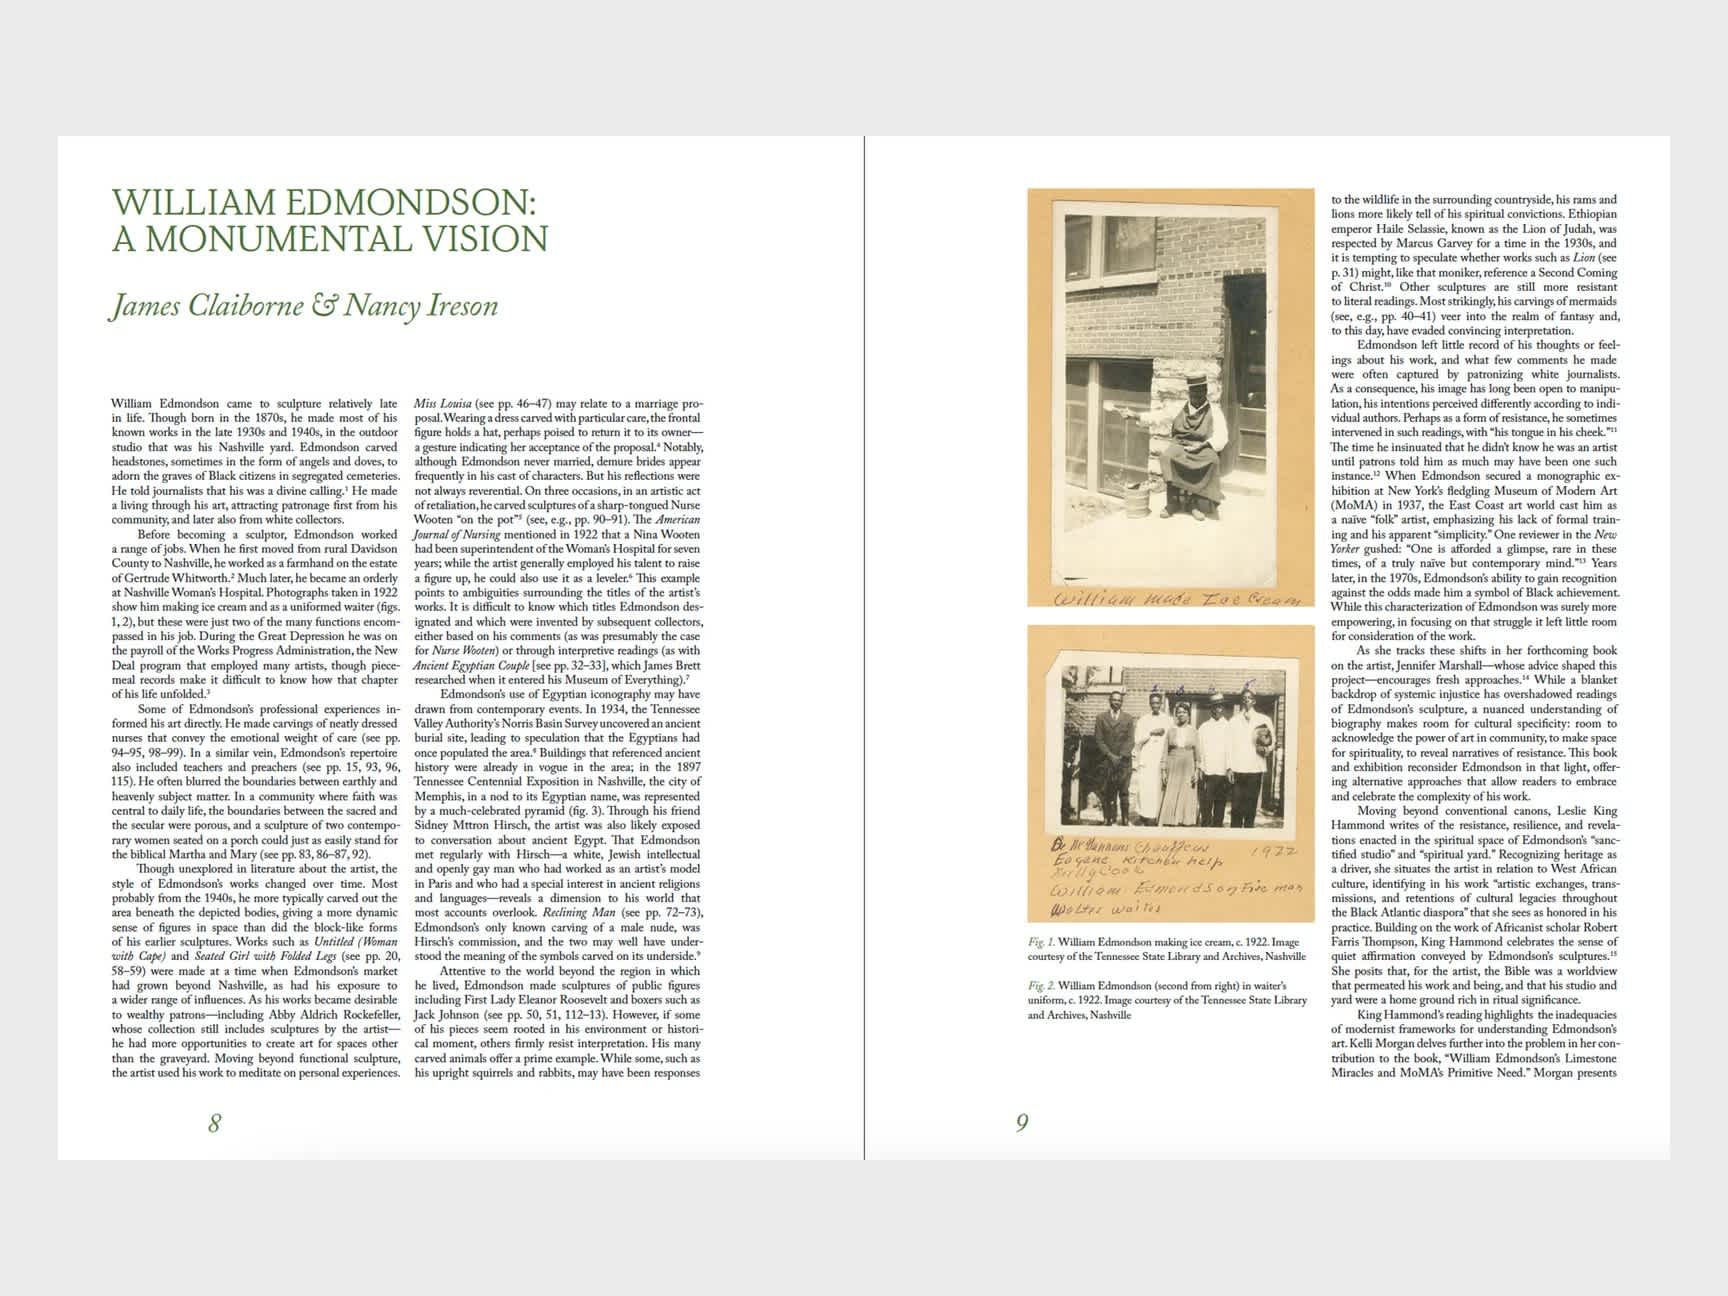 Book interior. The left page has two columns of text beneath a green title. The right page features a column of two images next to a column of text. The images are early photographs of the sculptor William Edmondson.